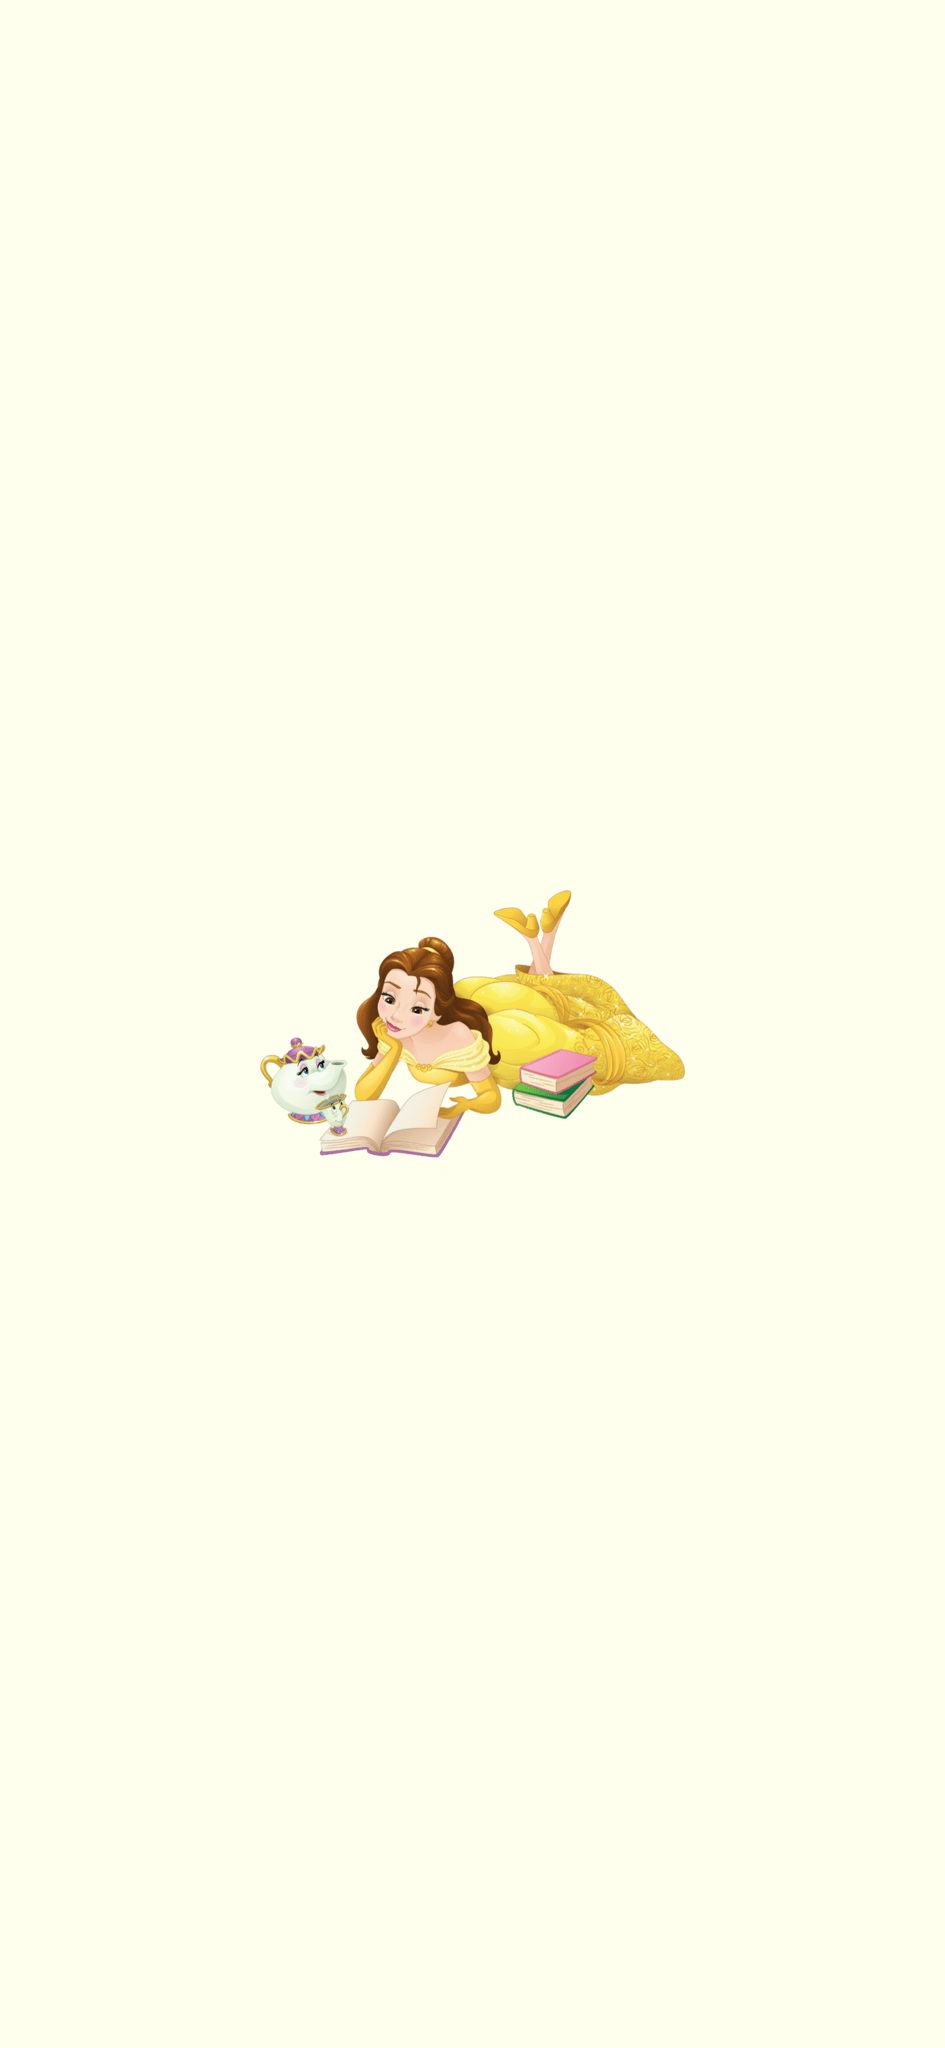 Disney Princess Belle lying down on the floor reading a book - Belle